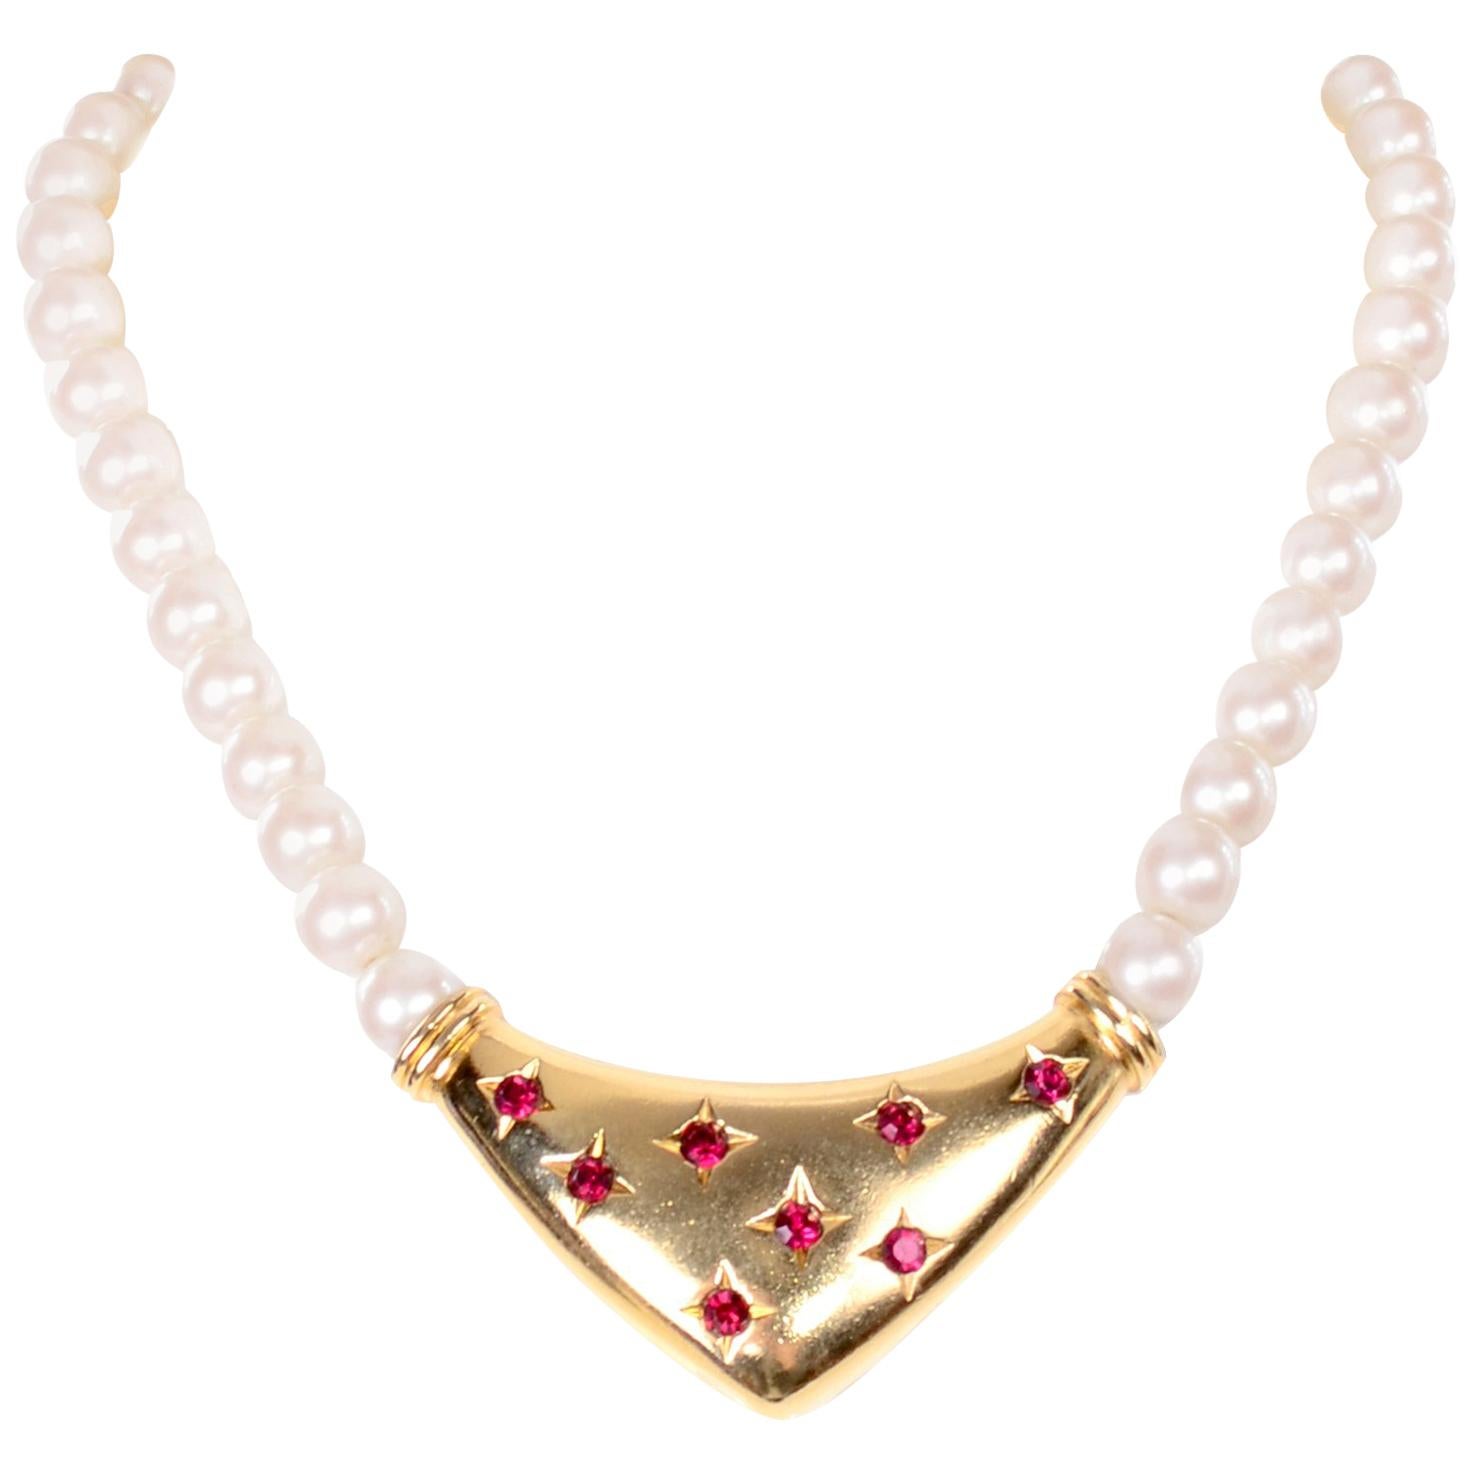 Yves Saint Laurent Signed YSL Vintage Pearls Gold Tone Bib Necklace w Red Stones